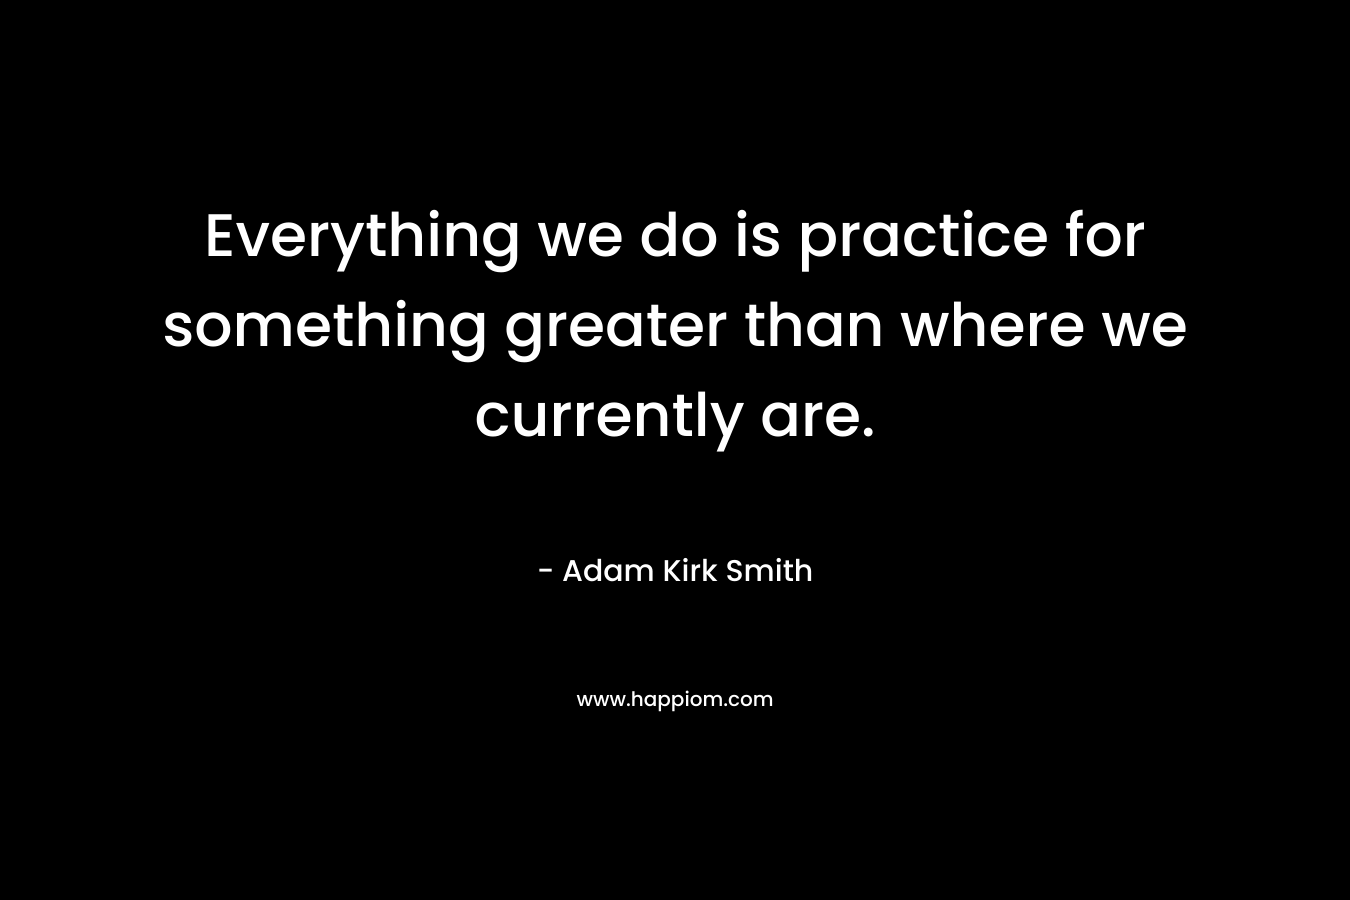 Everything we do is practice for something greater than where we currently are.